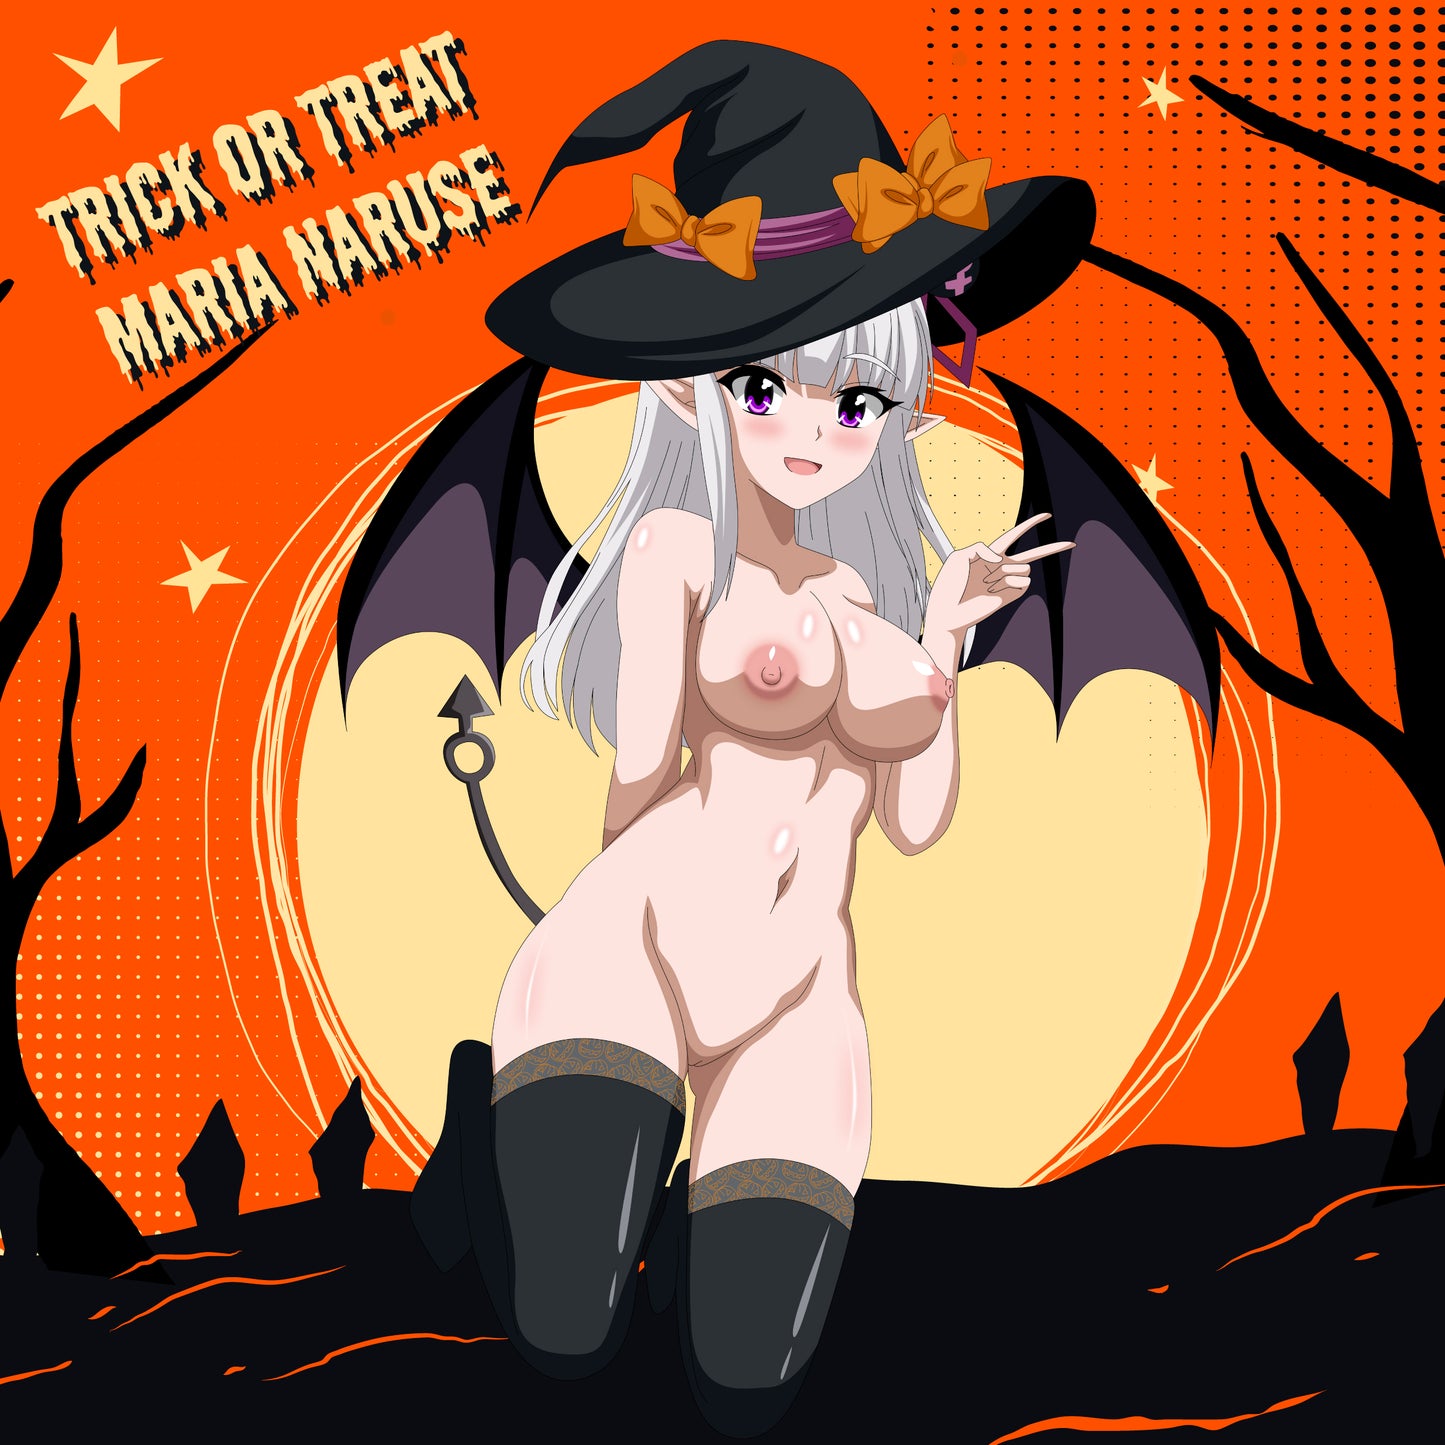 Trick or Treat Maria Naruse